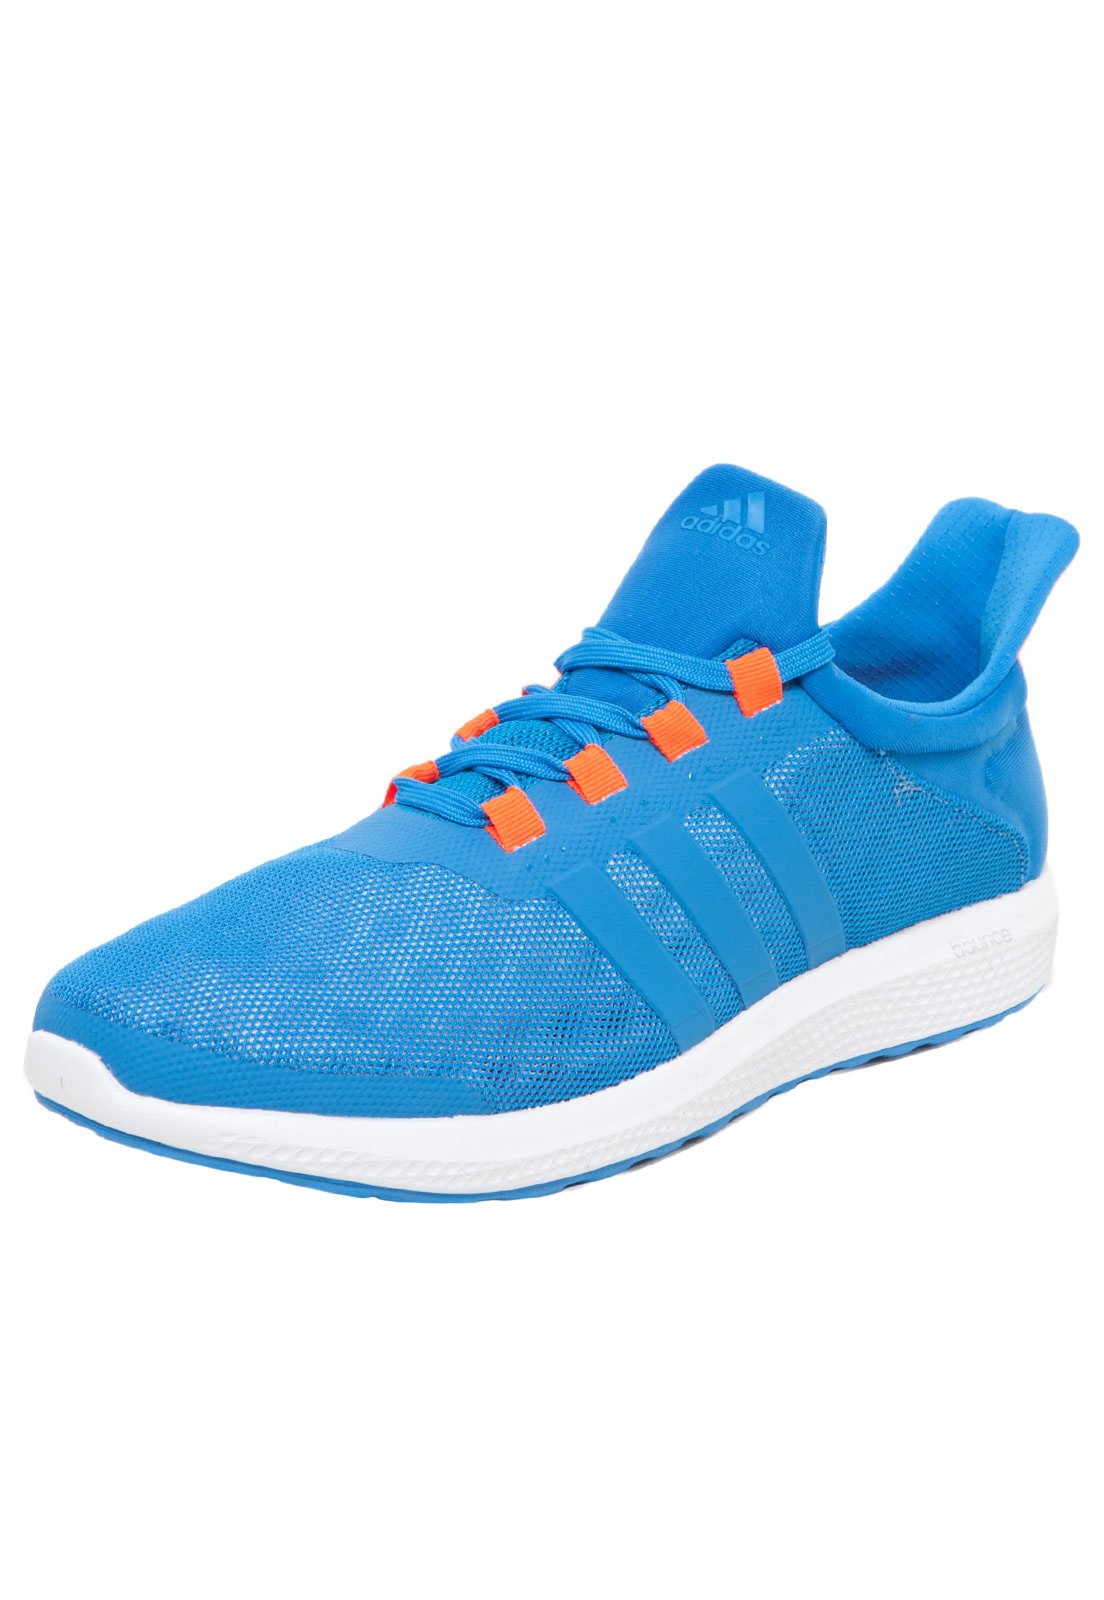 adidas climachill sonic bounce